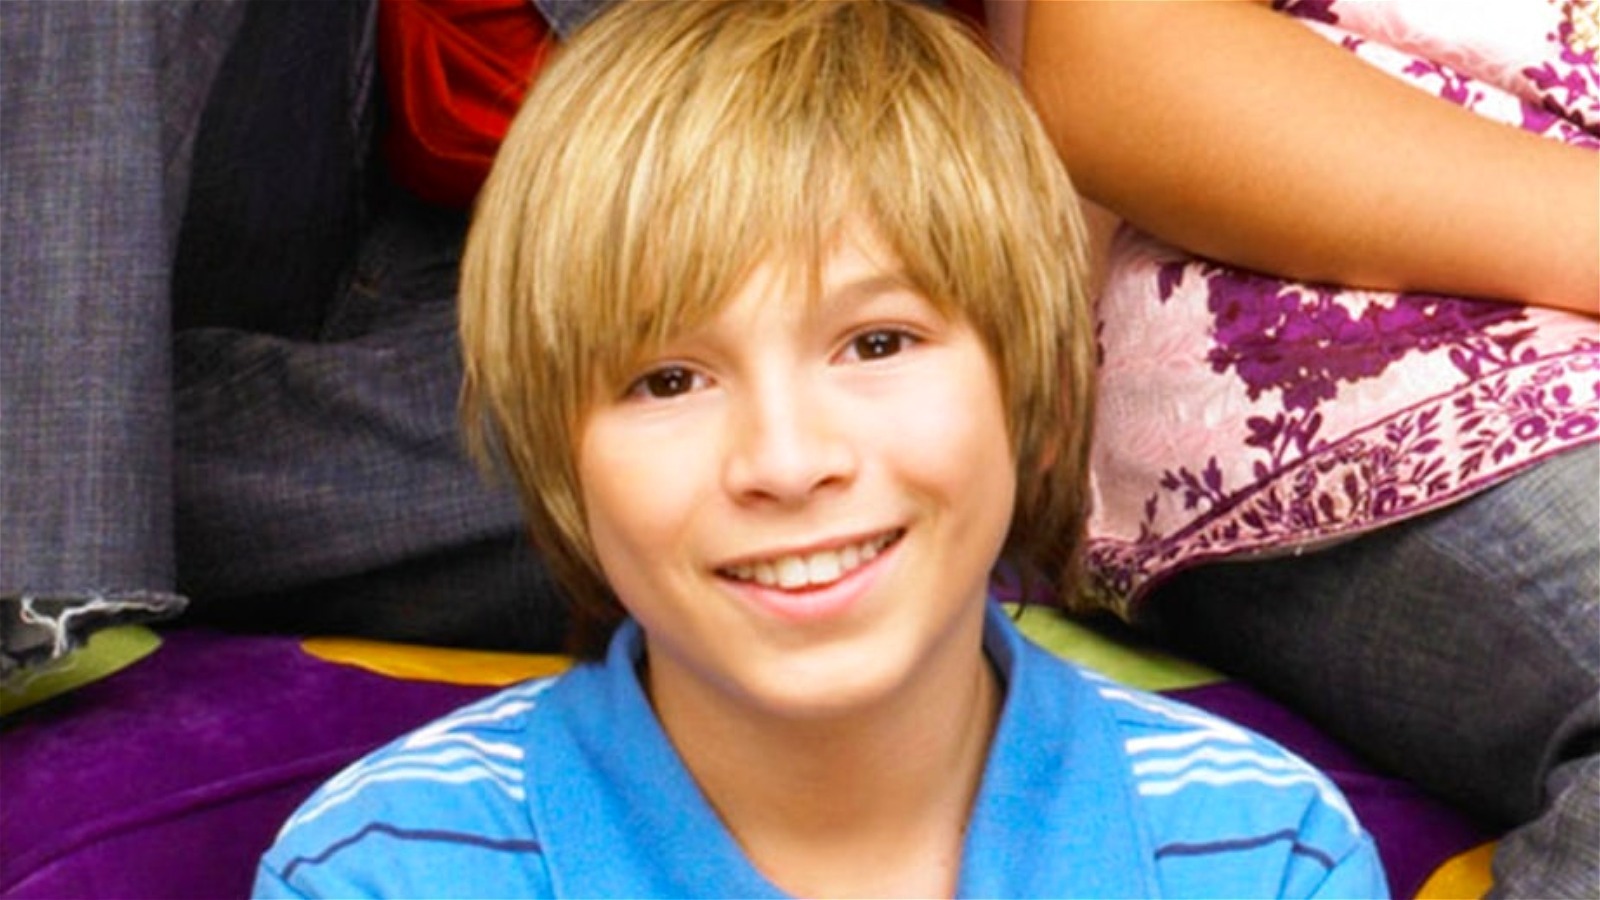 Actor Paul Butcher took on the role of Dustin Brooks on "Zoey 101,...